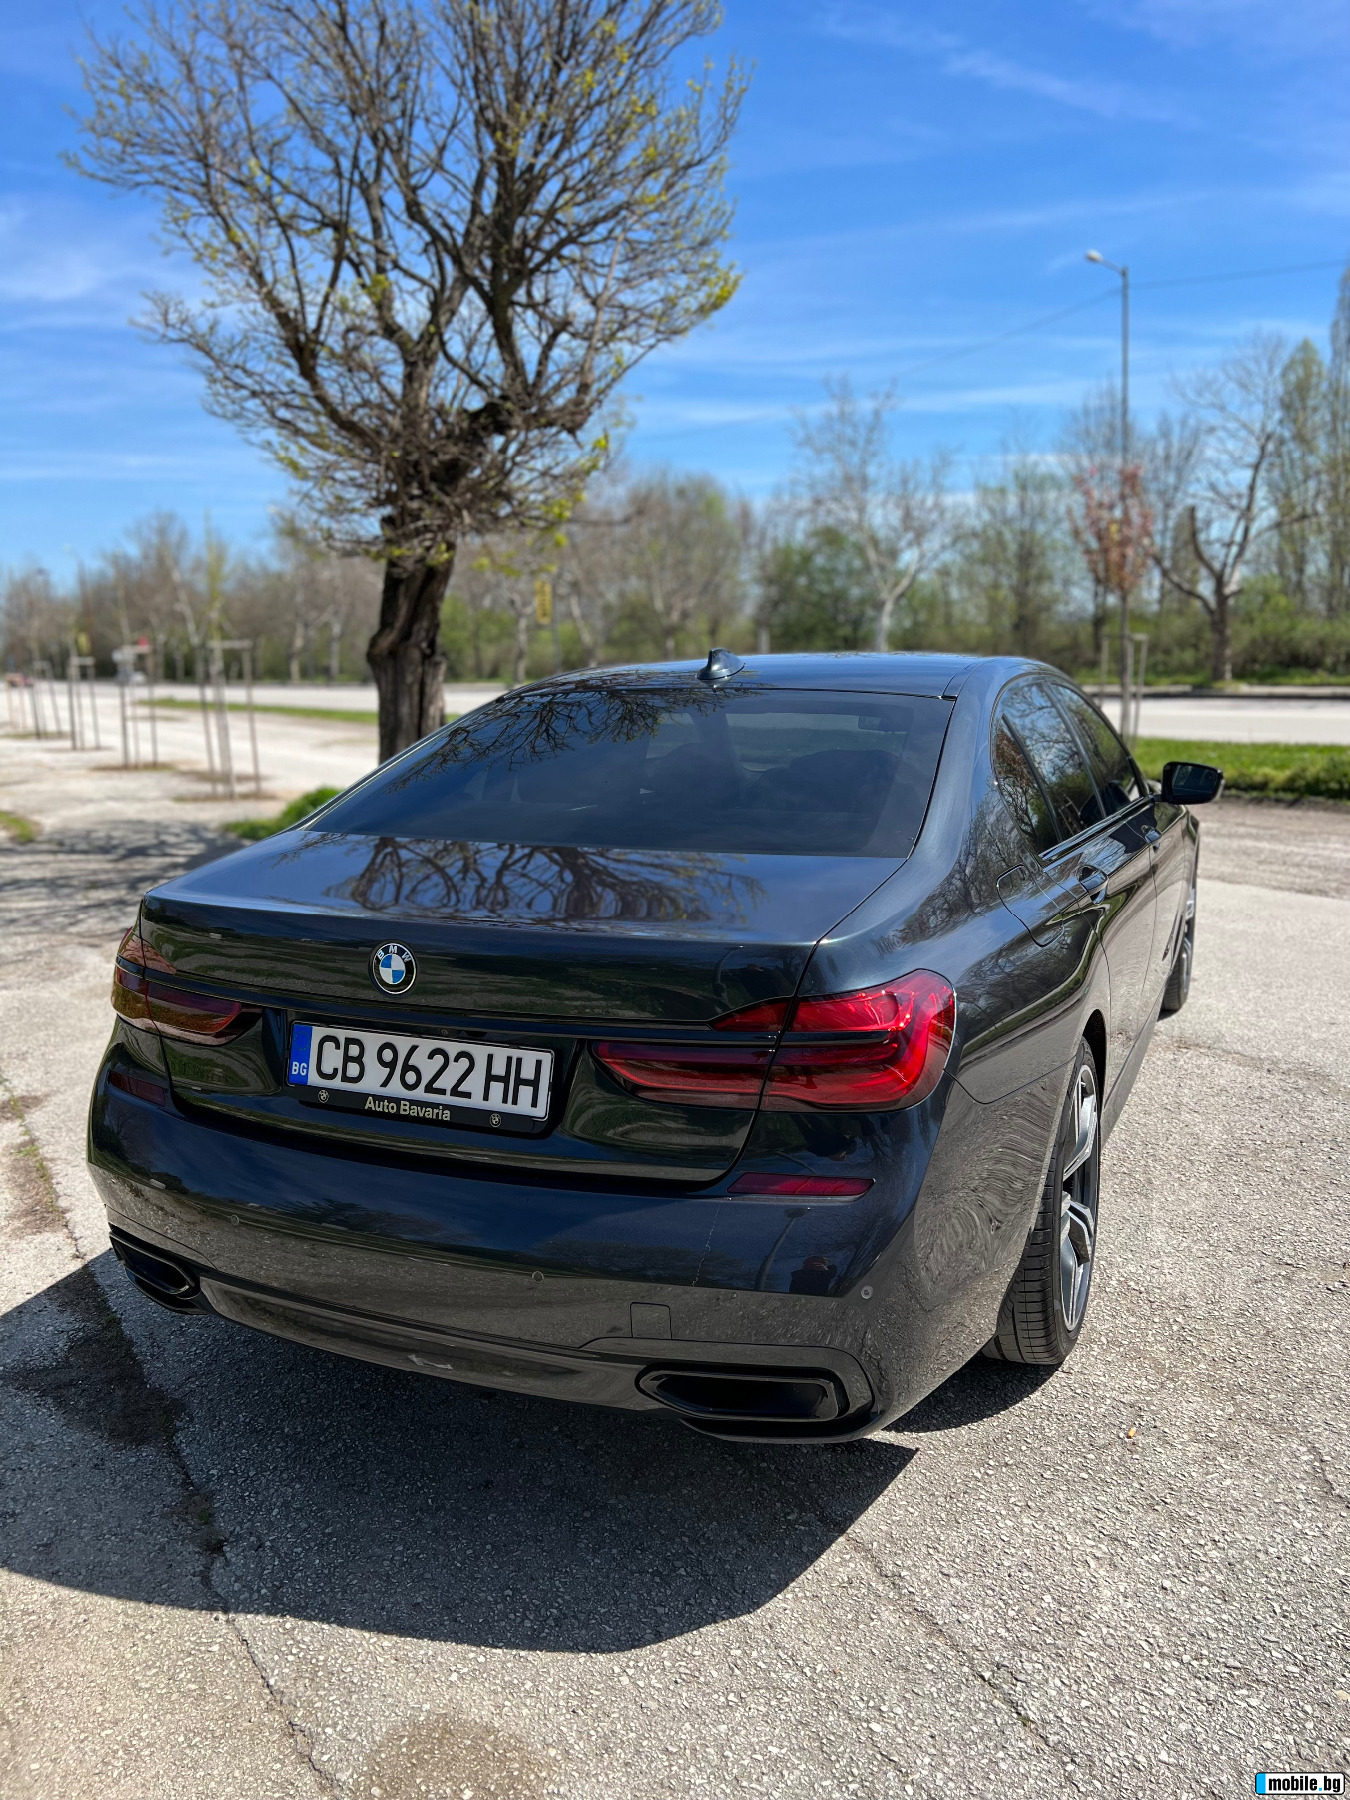 BMW 740 Drive! M package | Mobile.bg   5